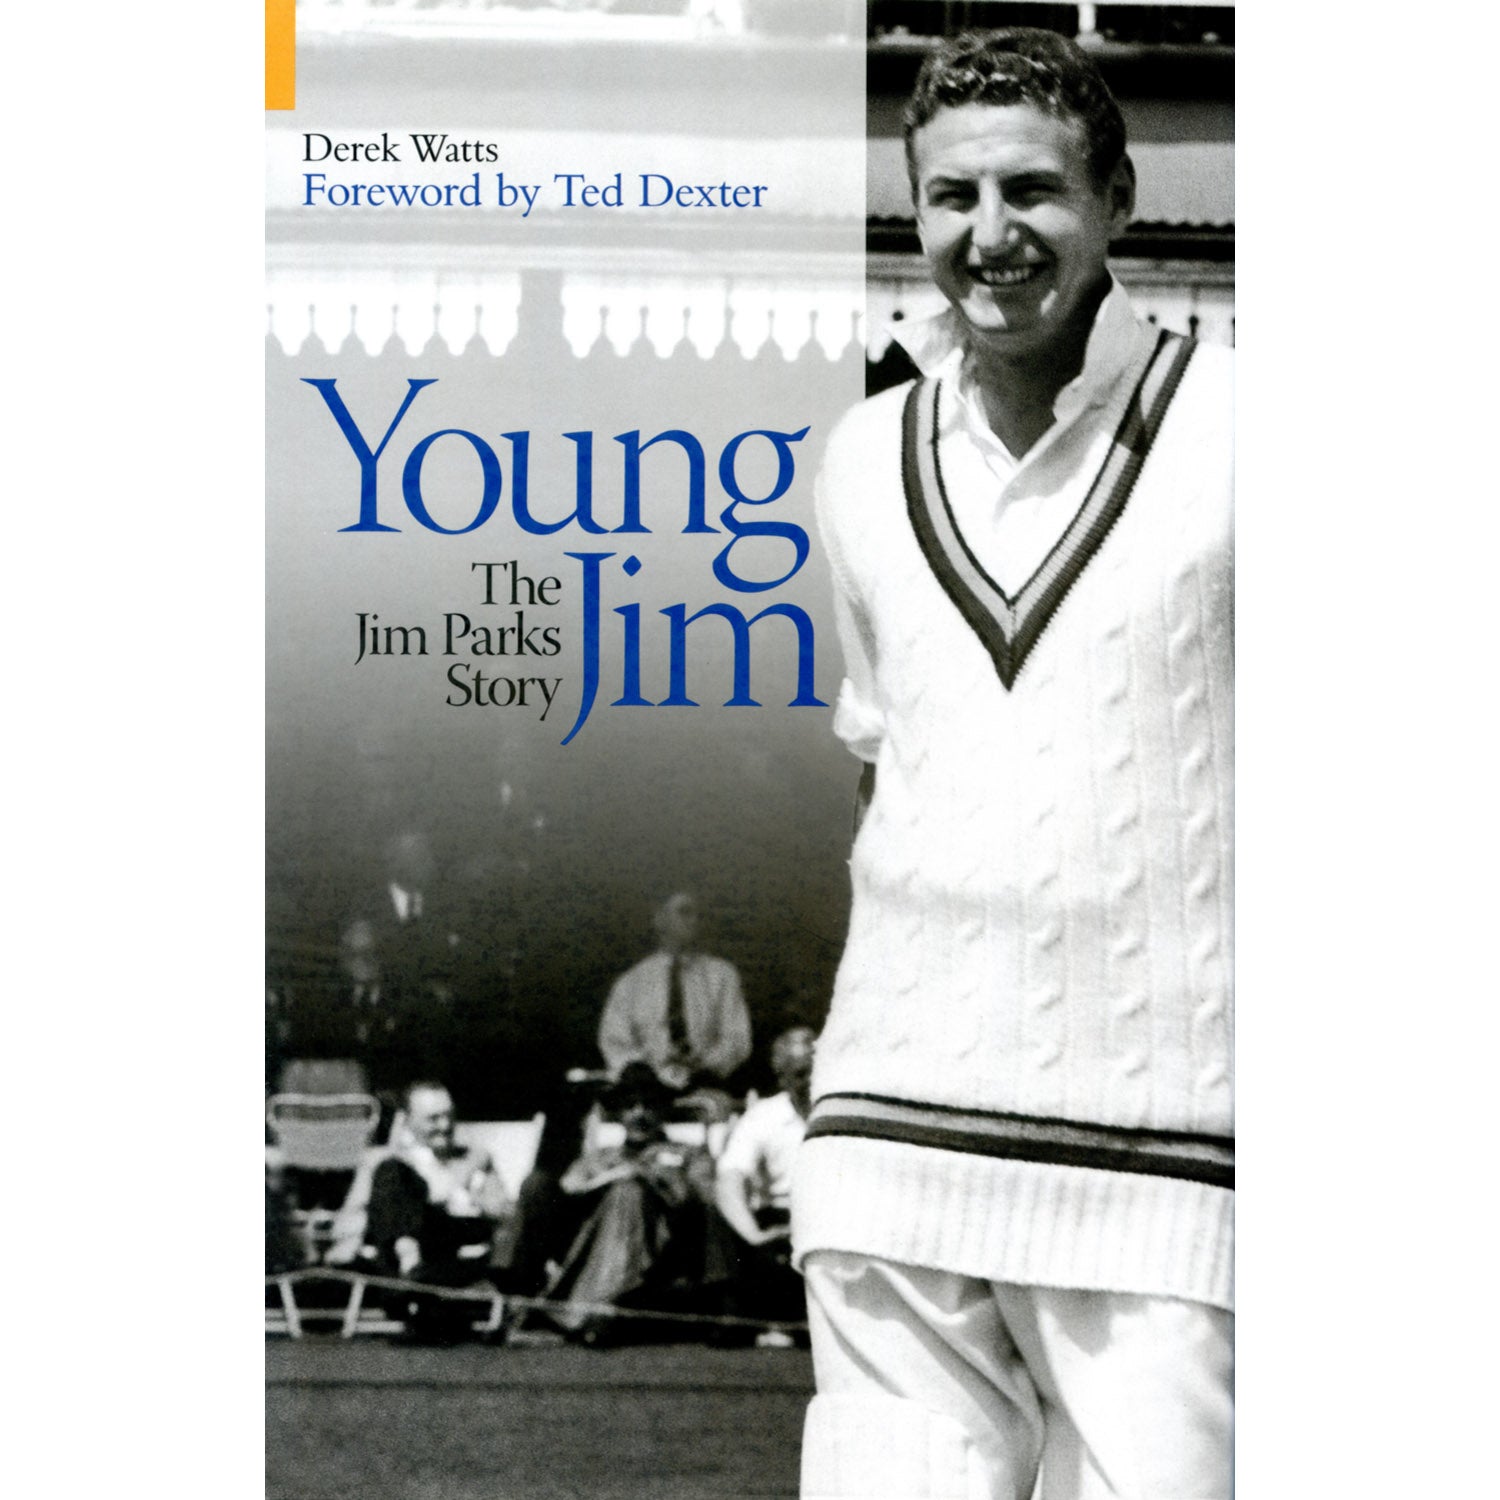 Young Jim – The Jim Parks Story